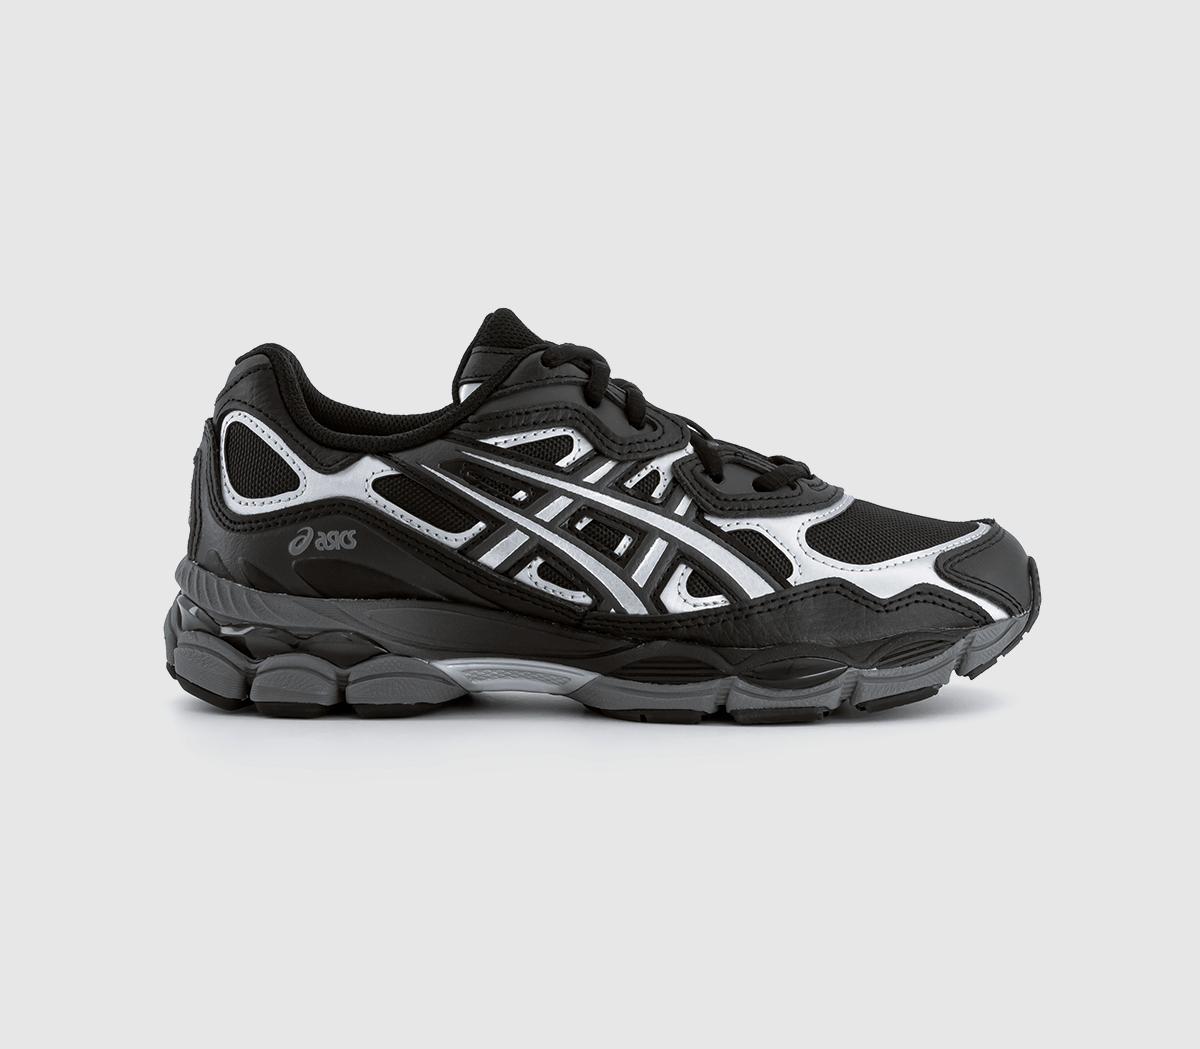 ASICS Gel NYC Trainers Black Graphite Grey - Men's Trainers